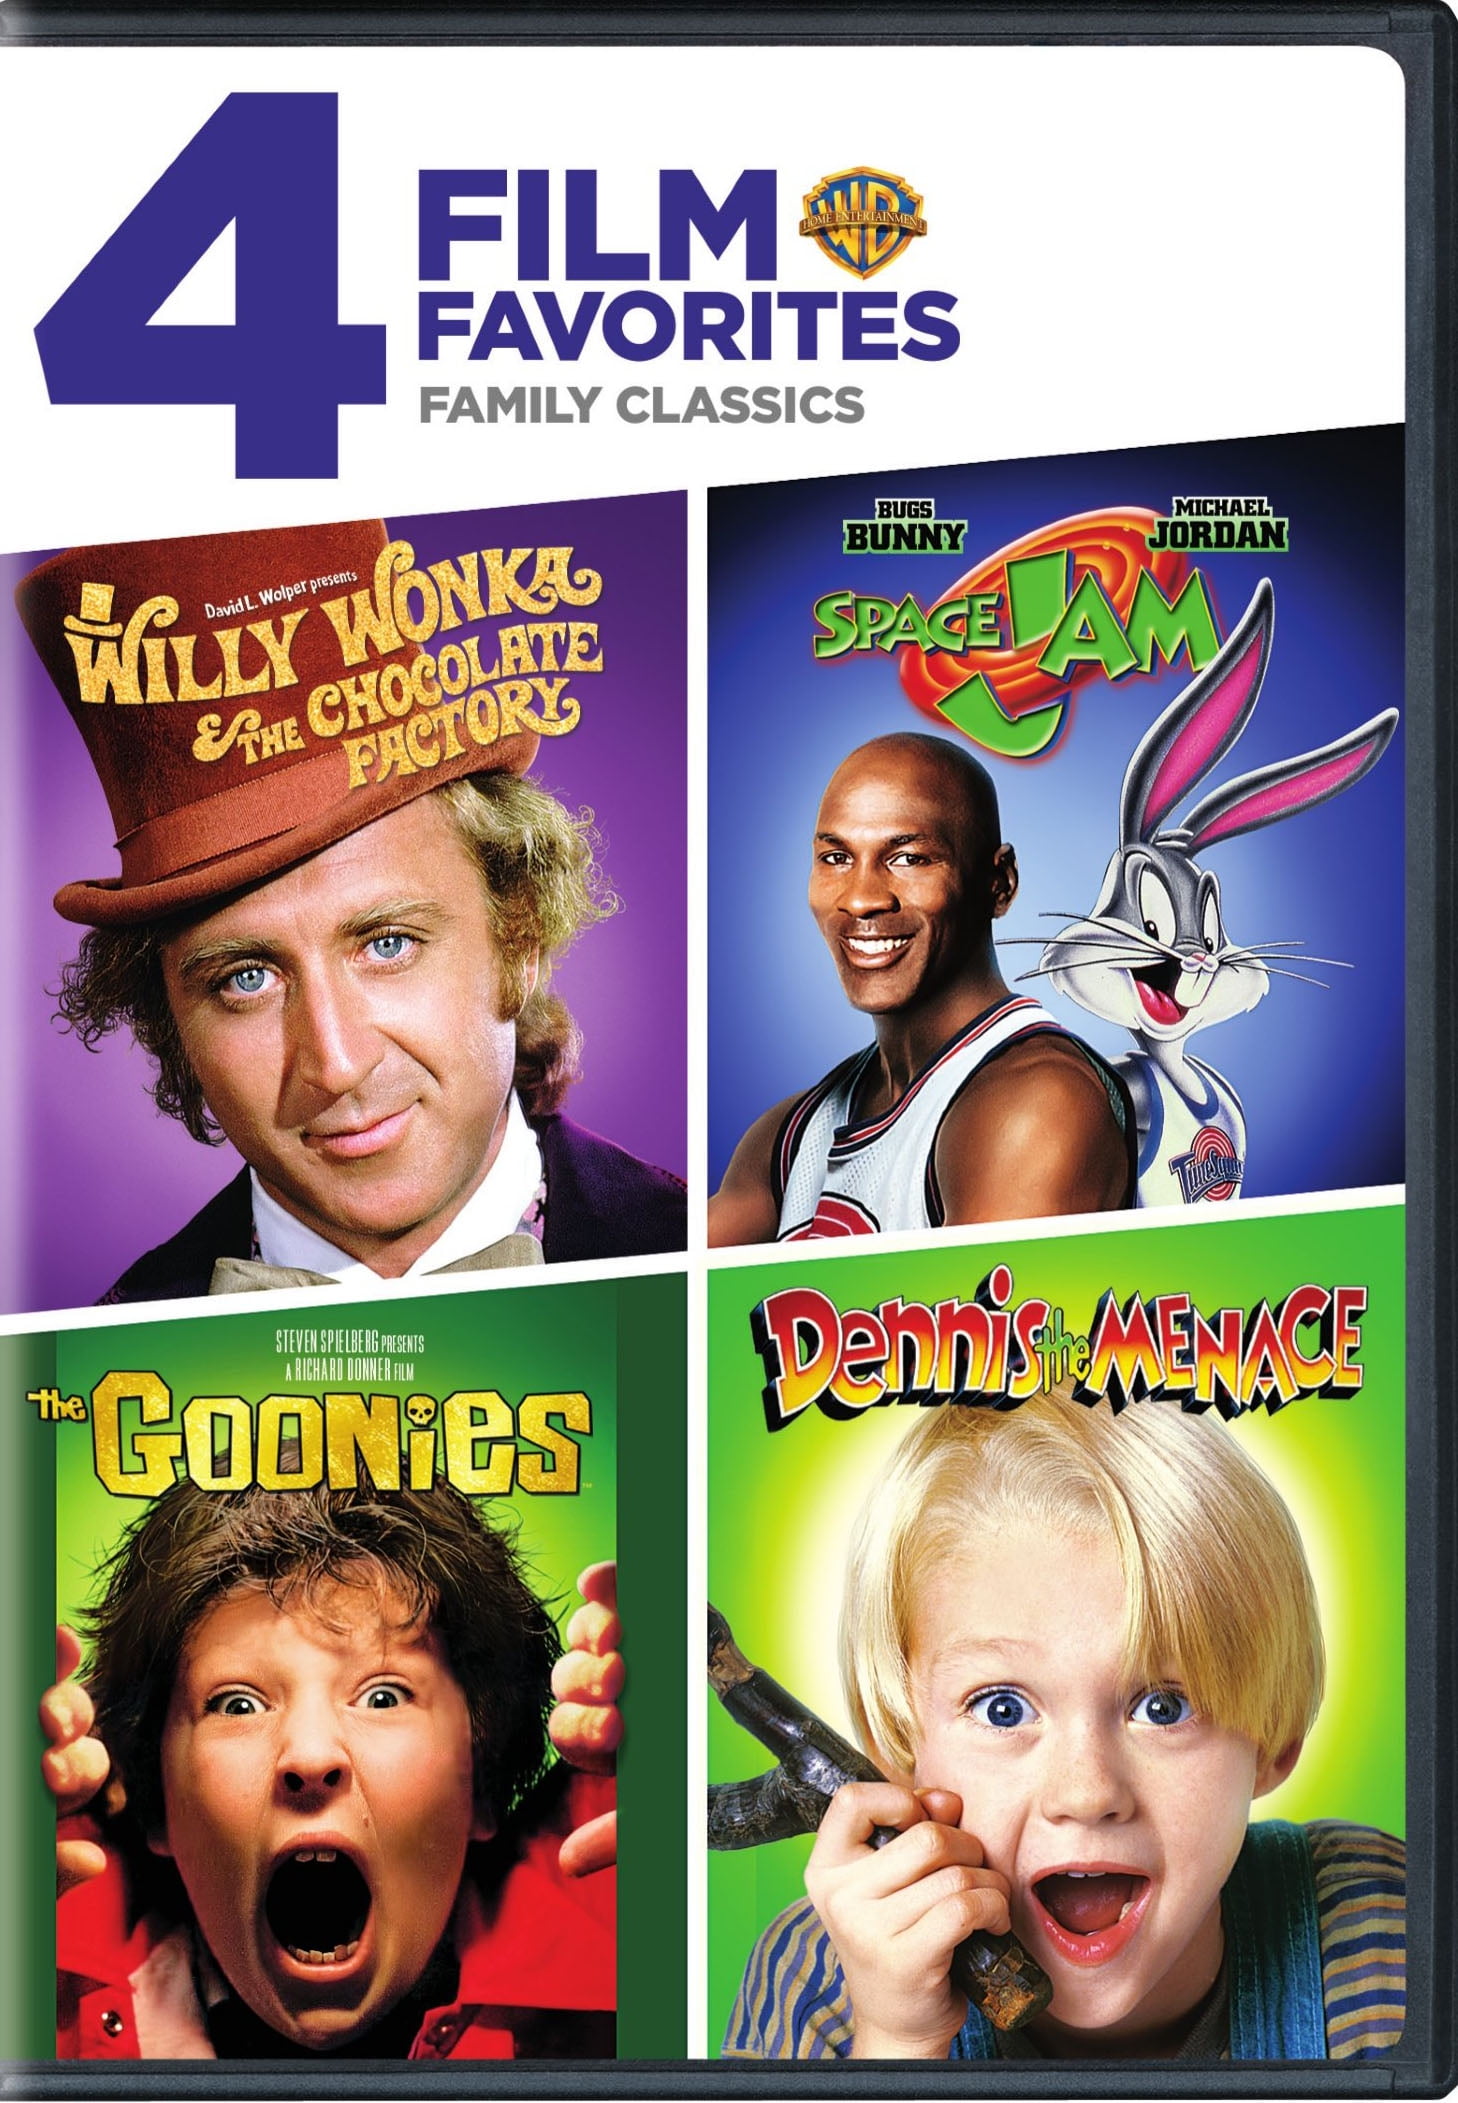 4 Film Favorites: Family Classics (Willy Wonka & The Chocolate Factory / Space Jam / The Goonies / Dennis The Menace) (DVD)